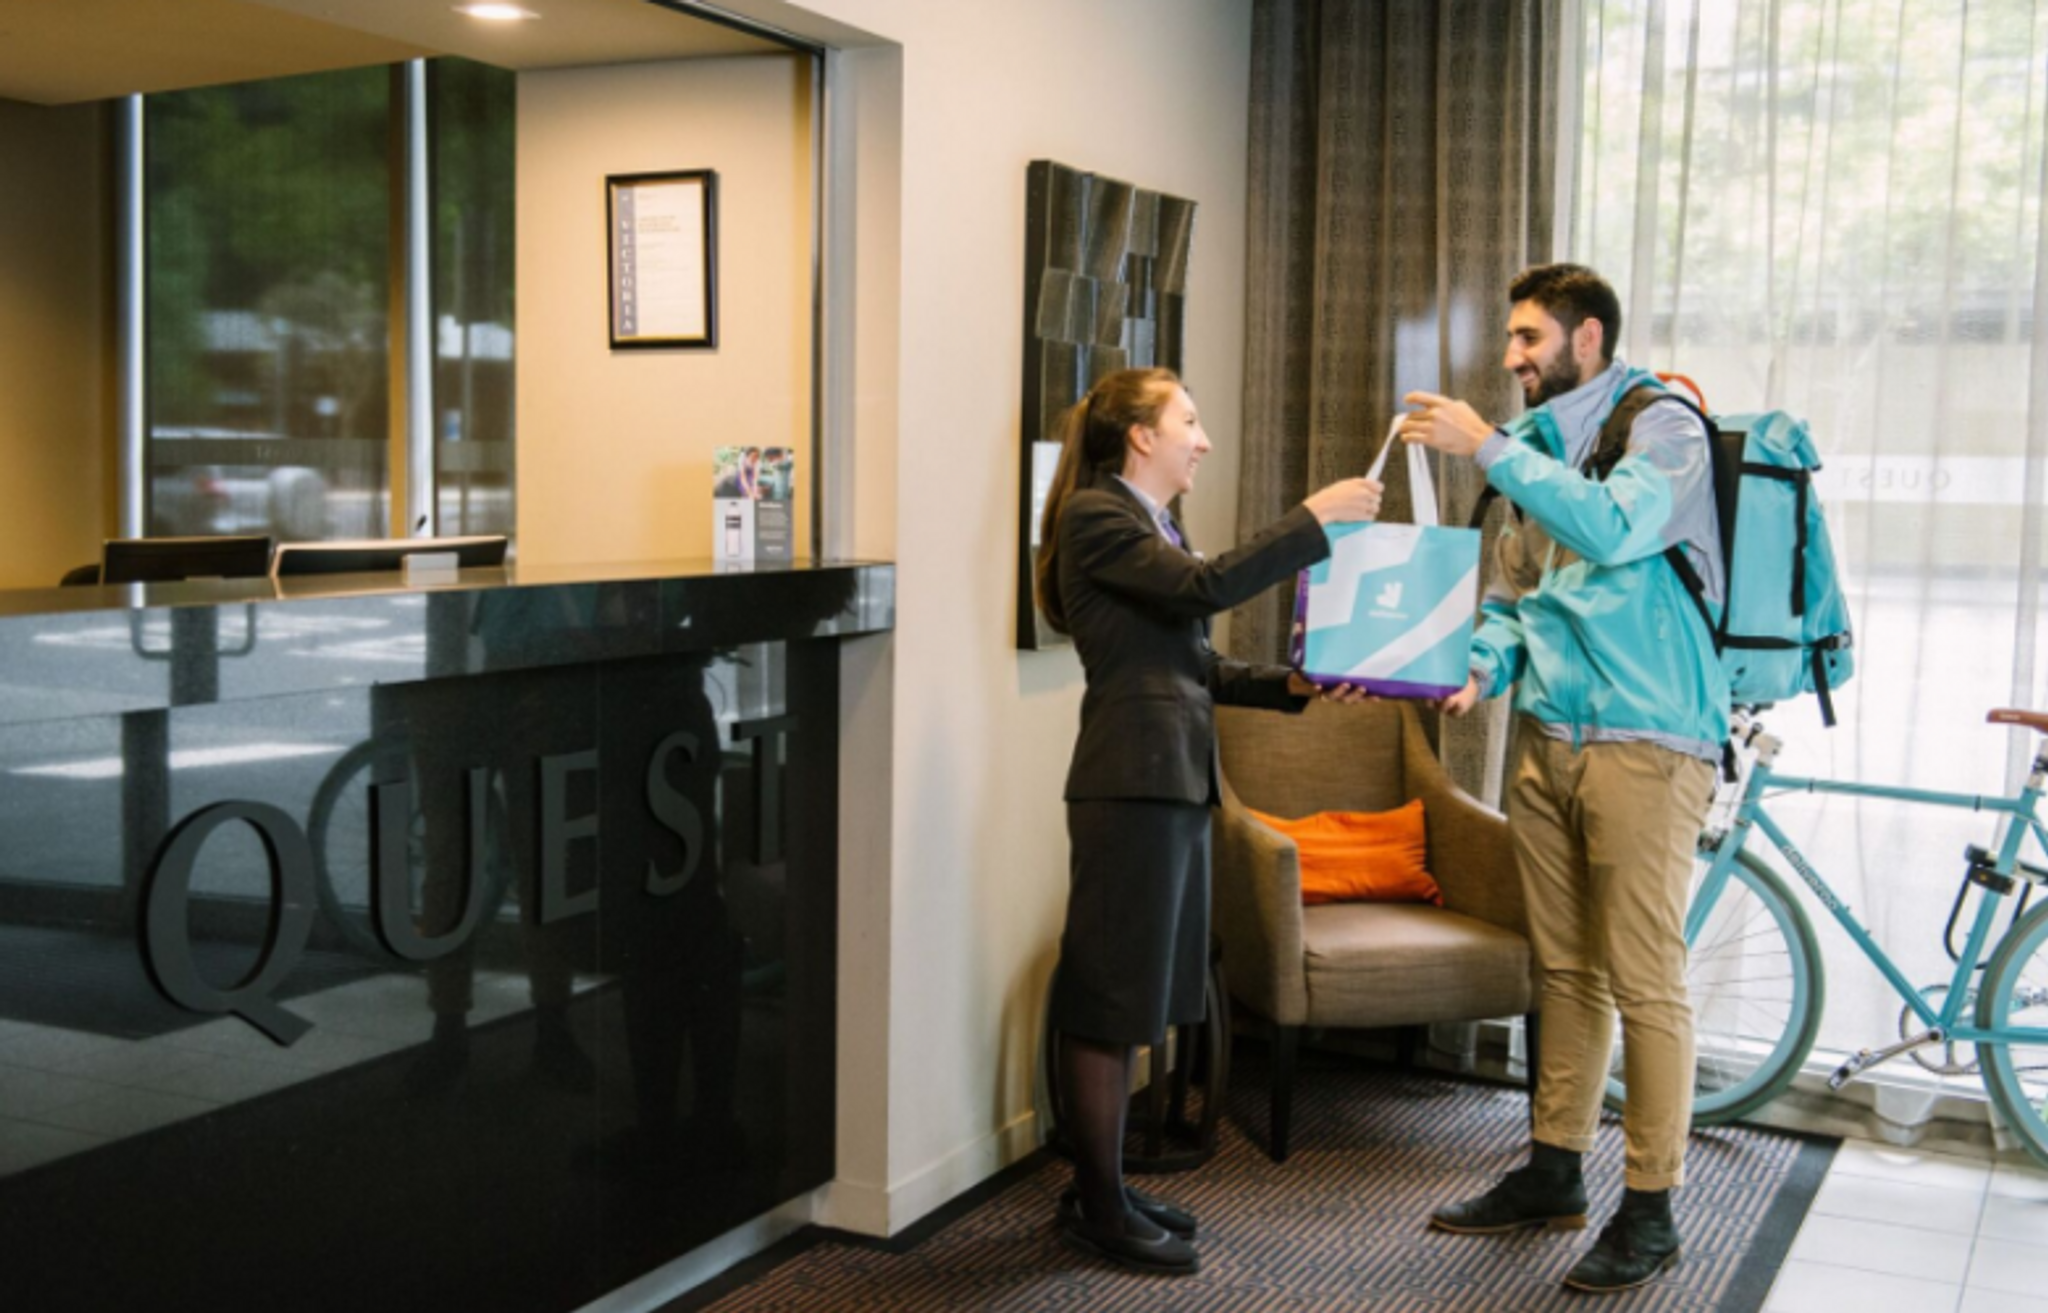 Deliveroo x Quest delivers to time-poor hotel guests